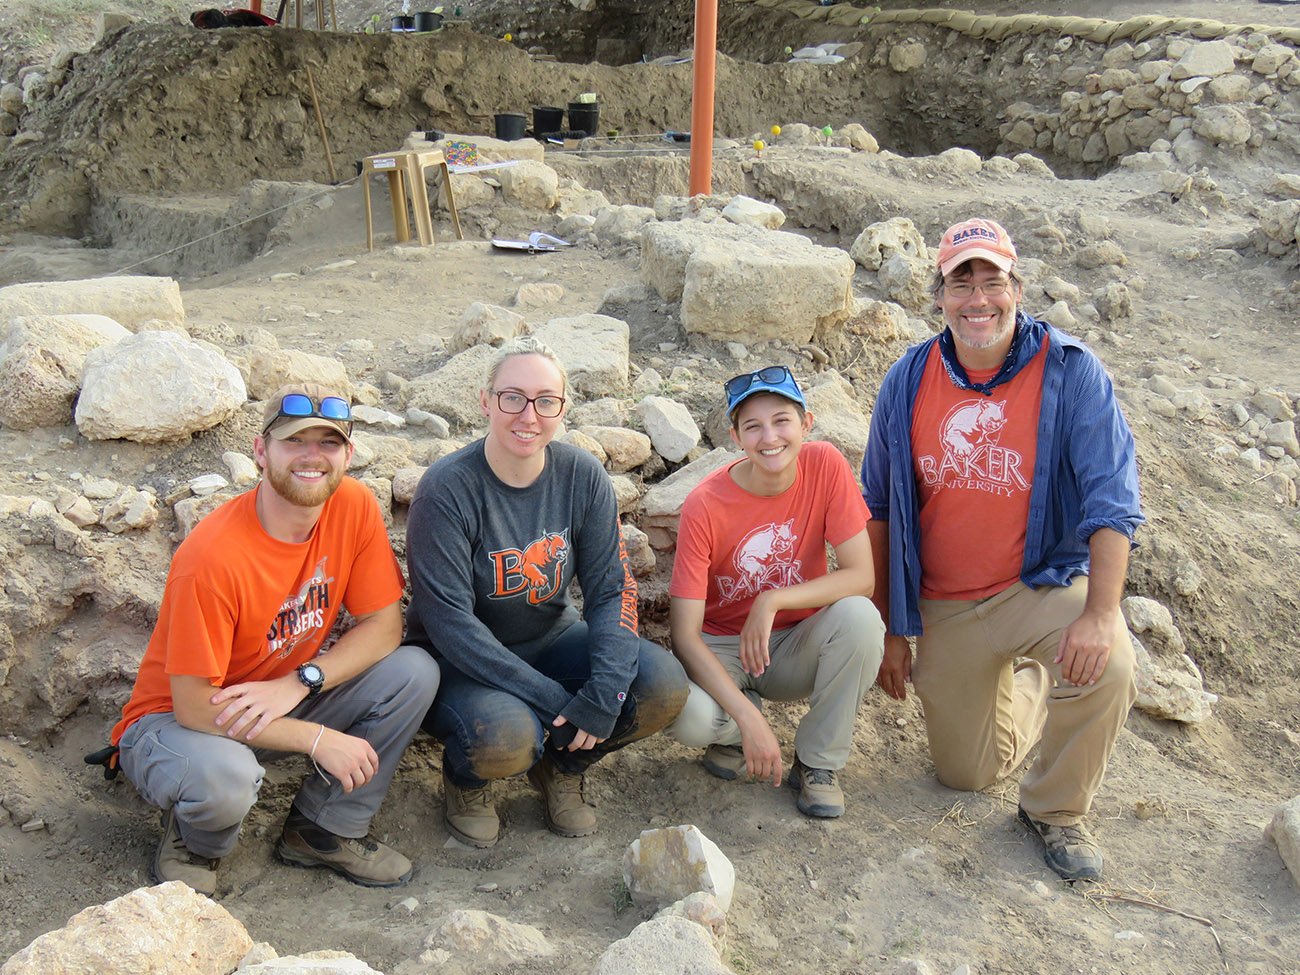 Nick Pumphrey with three Baker students at an excavation site.